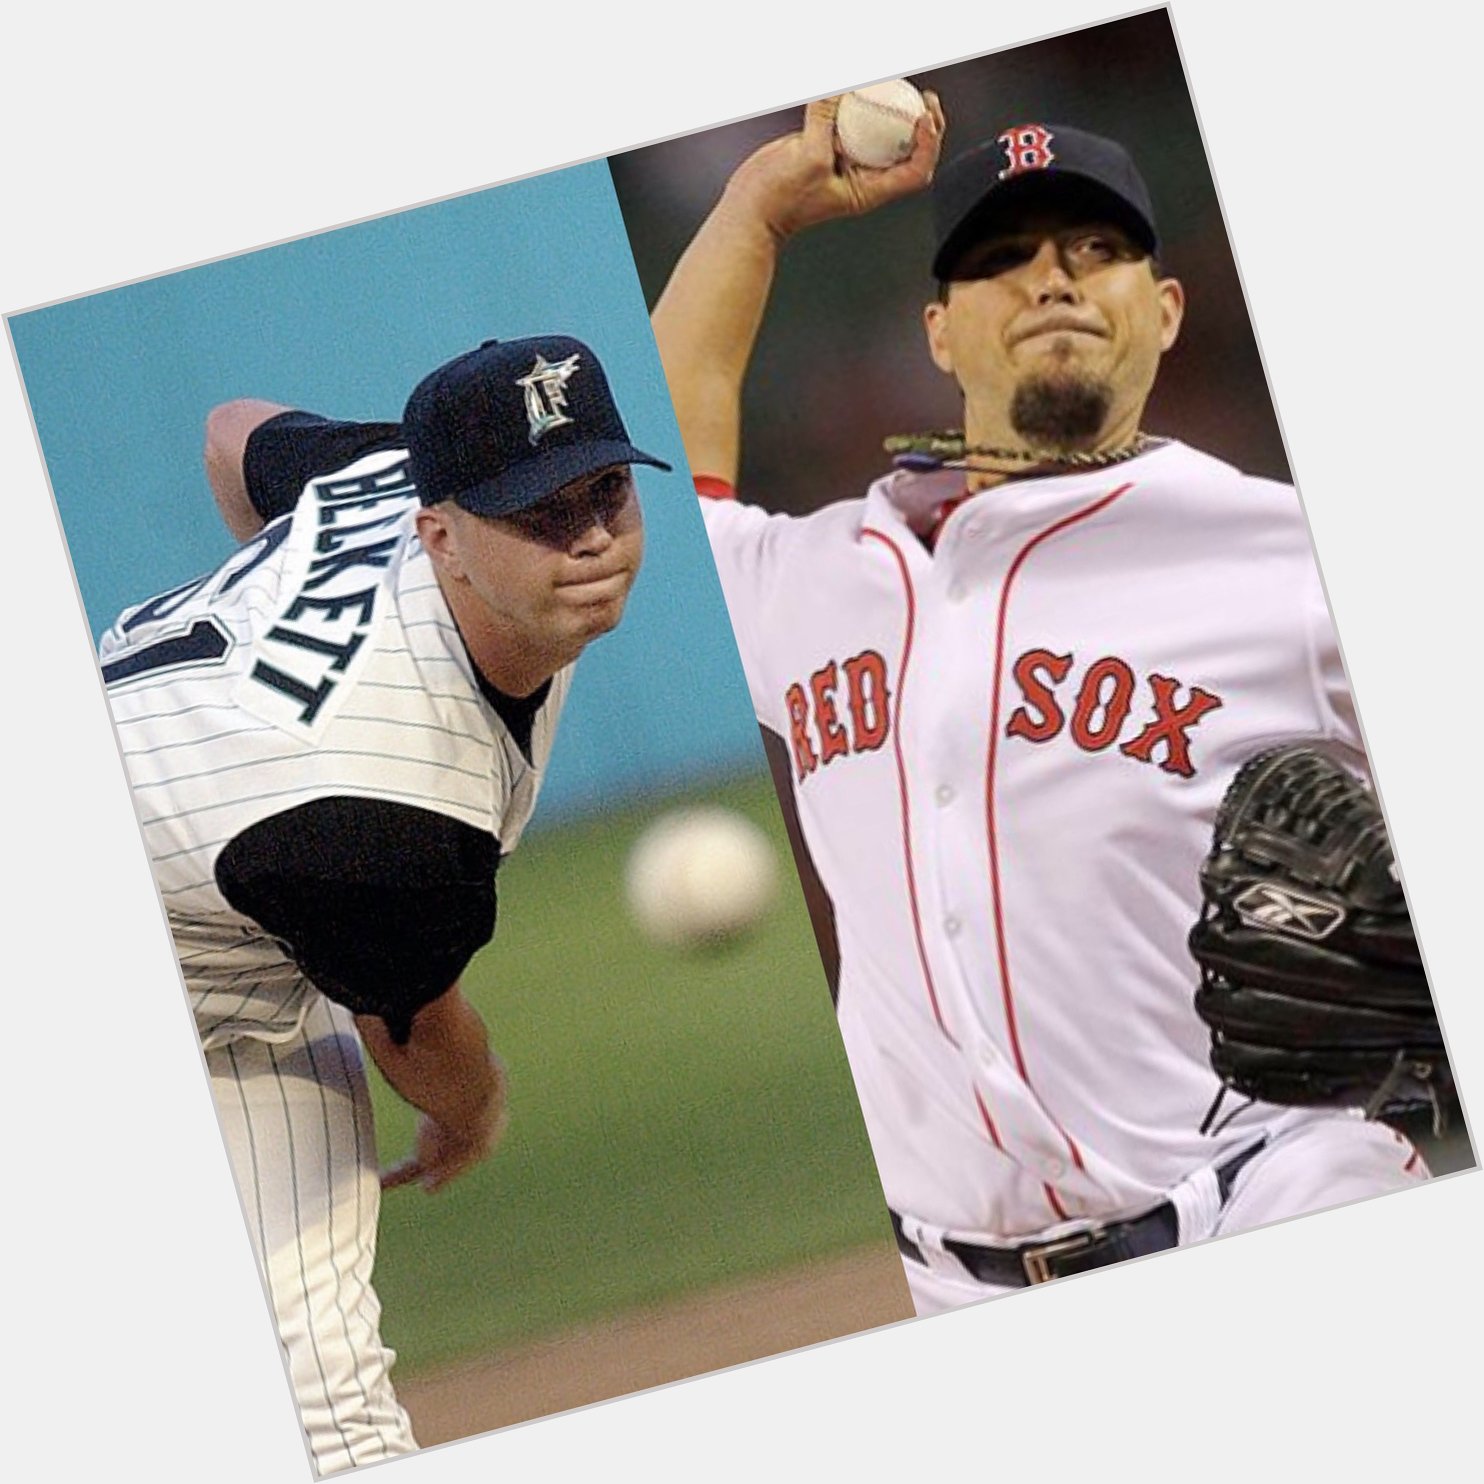 Happy birthday to Josh Beckett, who pitched the Marlins and Red Sox to World Series titles 